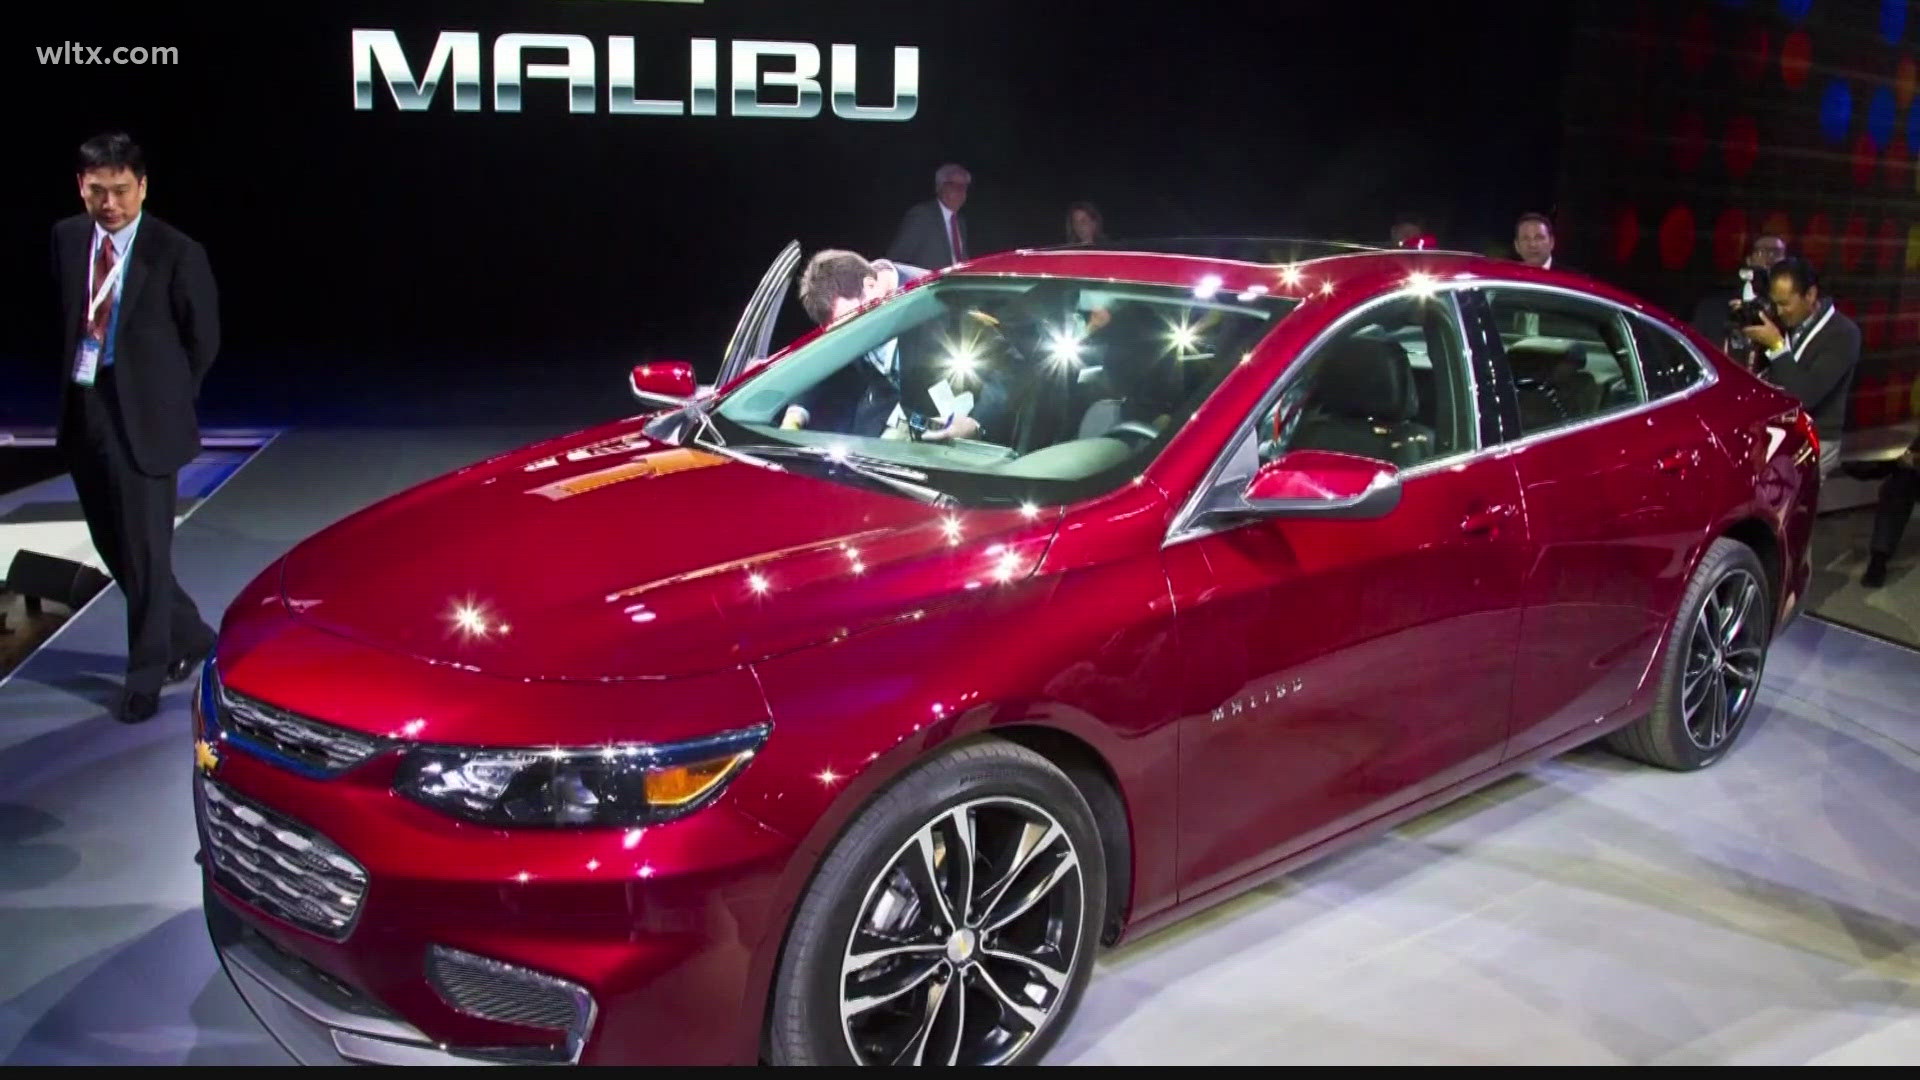 The Chevrolet Malibu, the last midsize car made by a Detroit automaker, is heading for the junkyard.